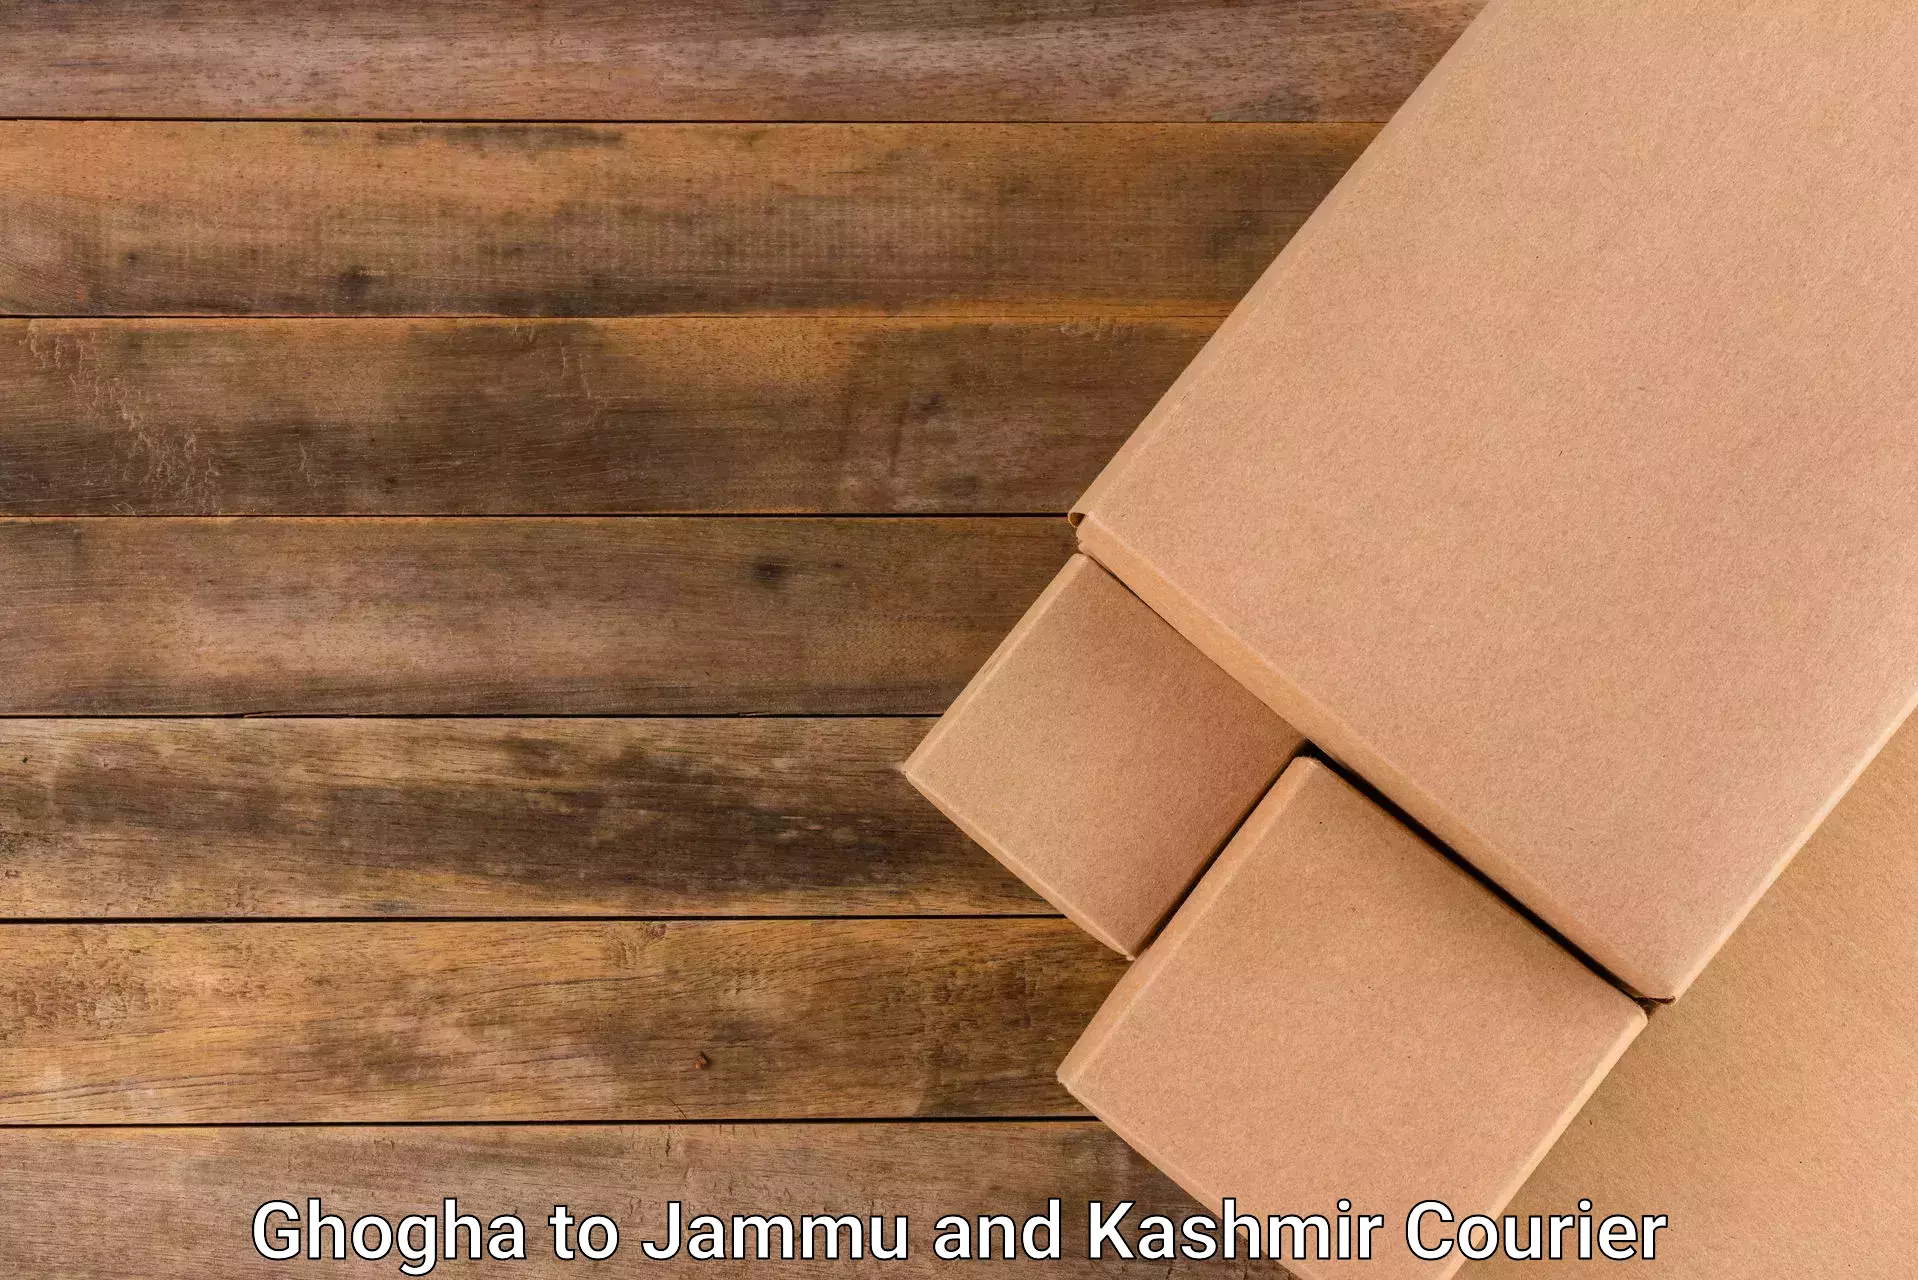 Urgent courier needs Ghogha to Shopian